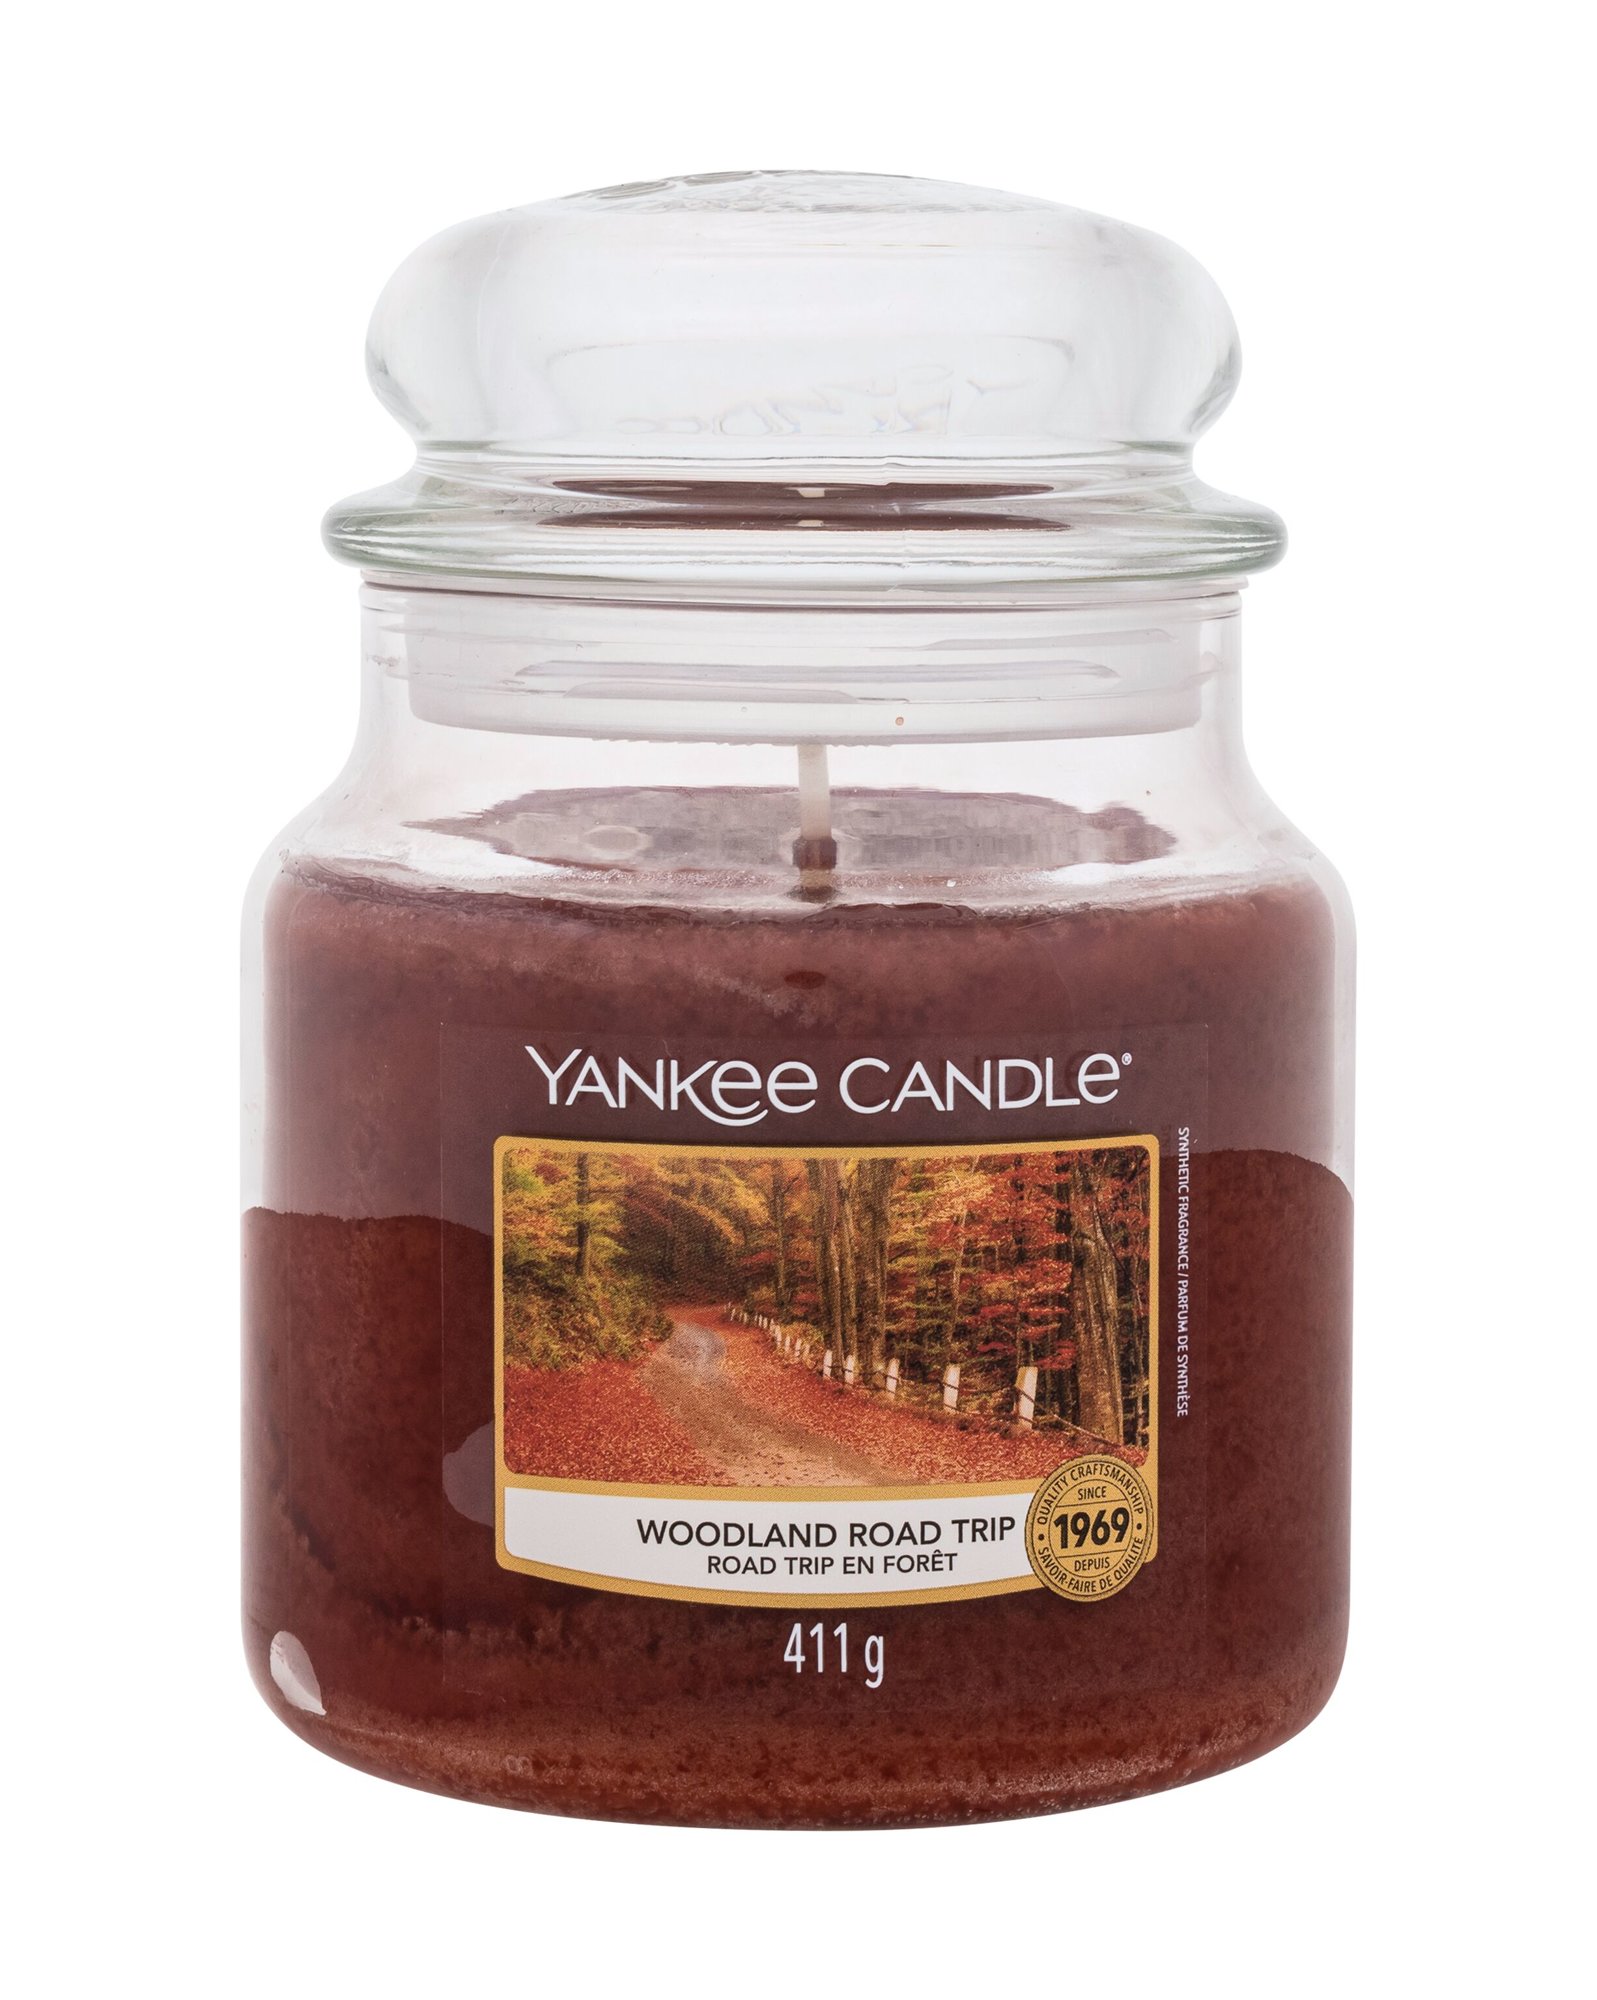 Yankee Candle Woodland Road Trip 411g Kvepalai Unisex Scented Candle